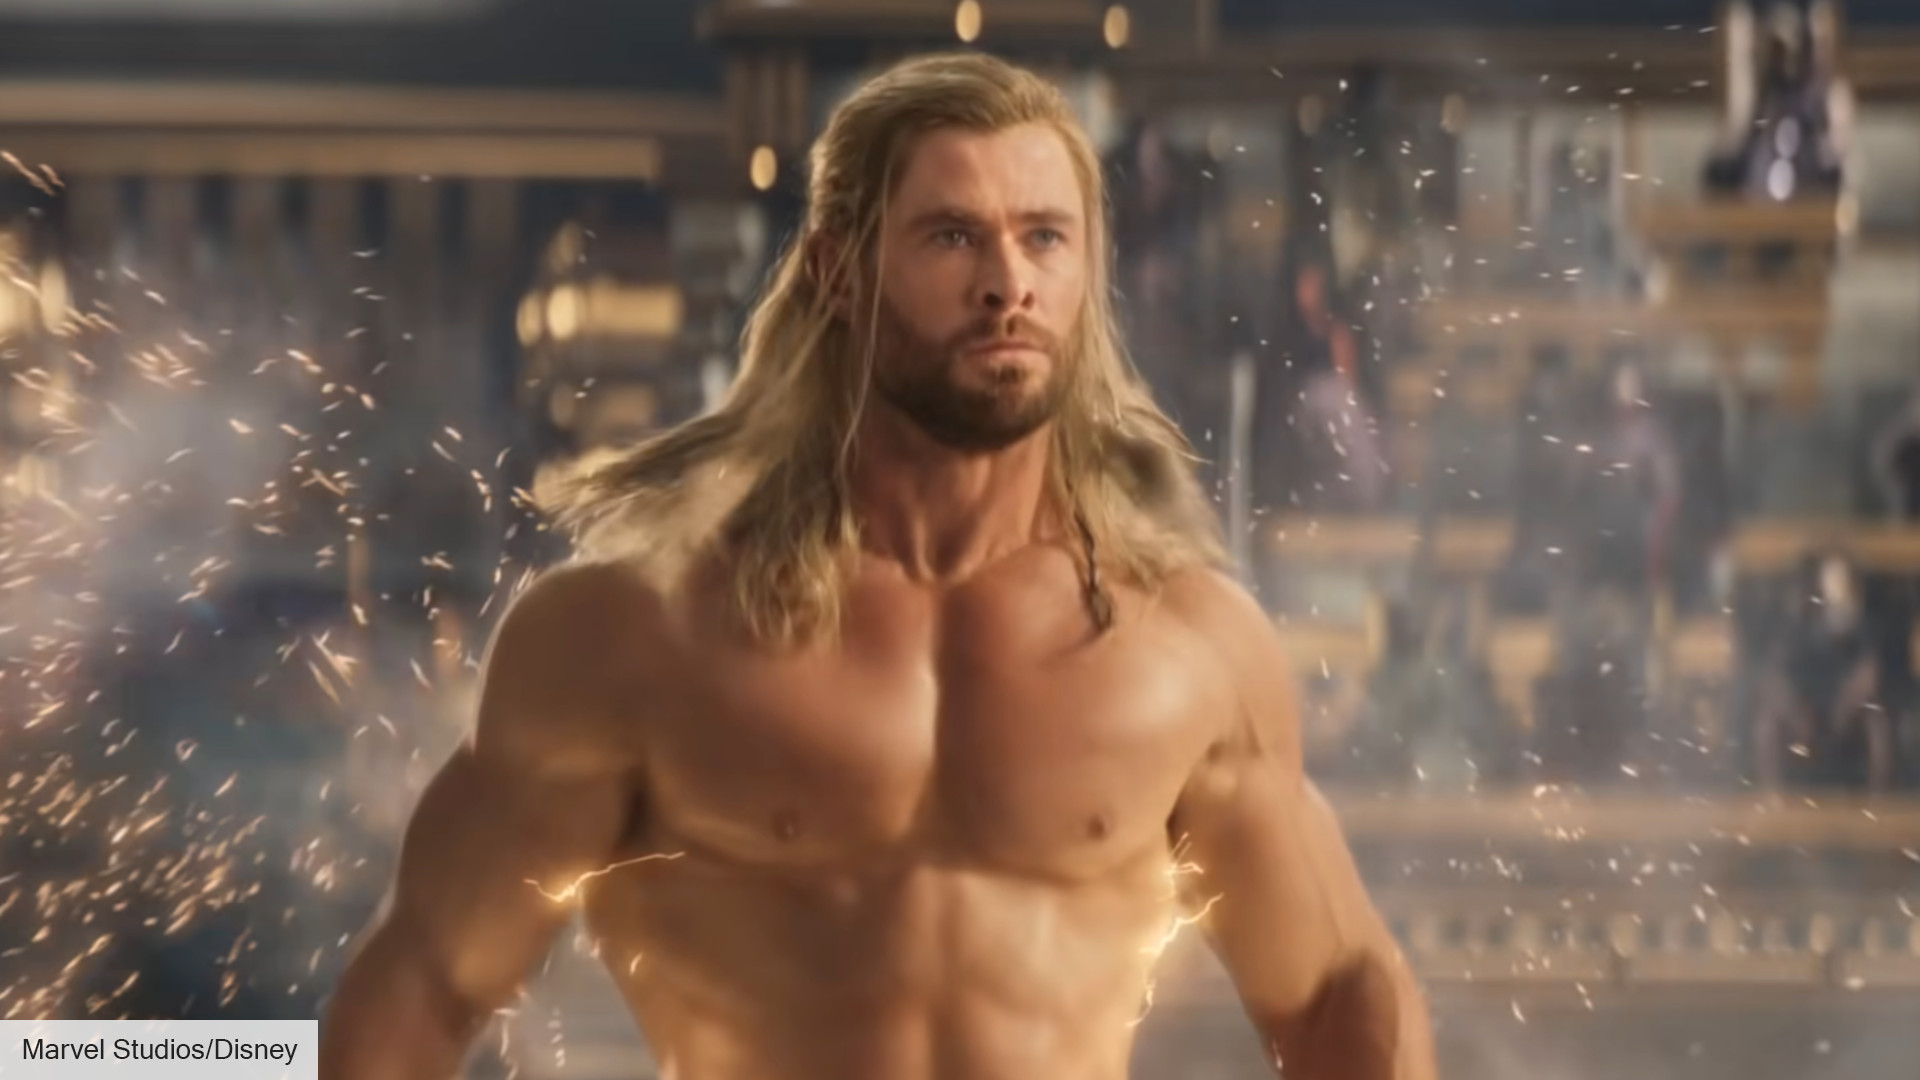 Thor 5 release date speculation, plot, cast, and more The Digital Fix